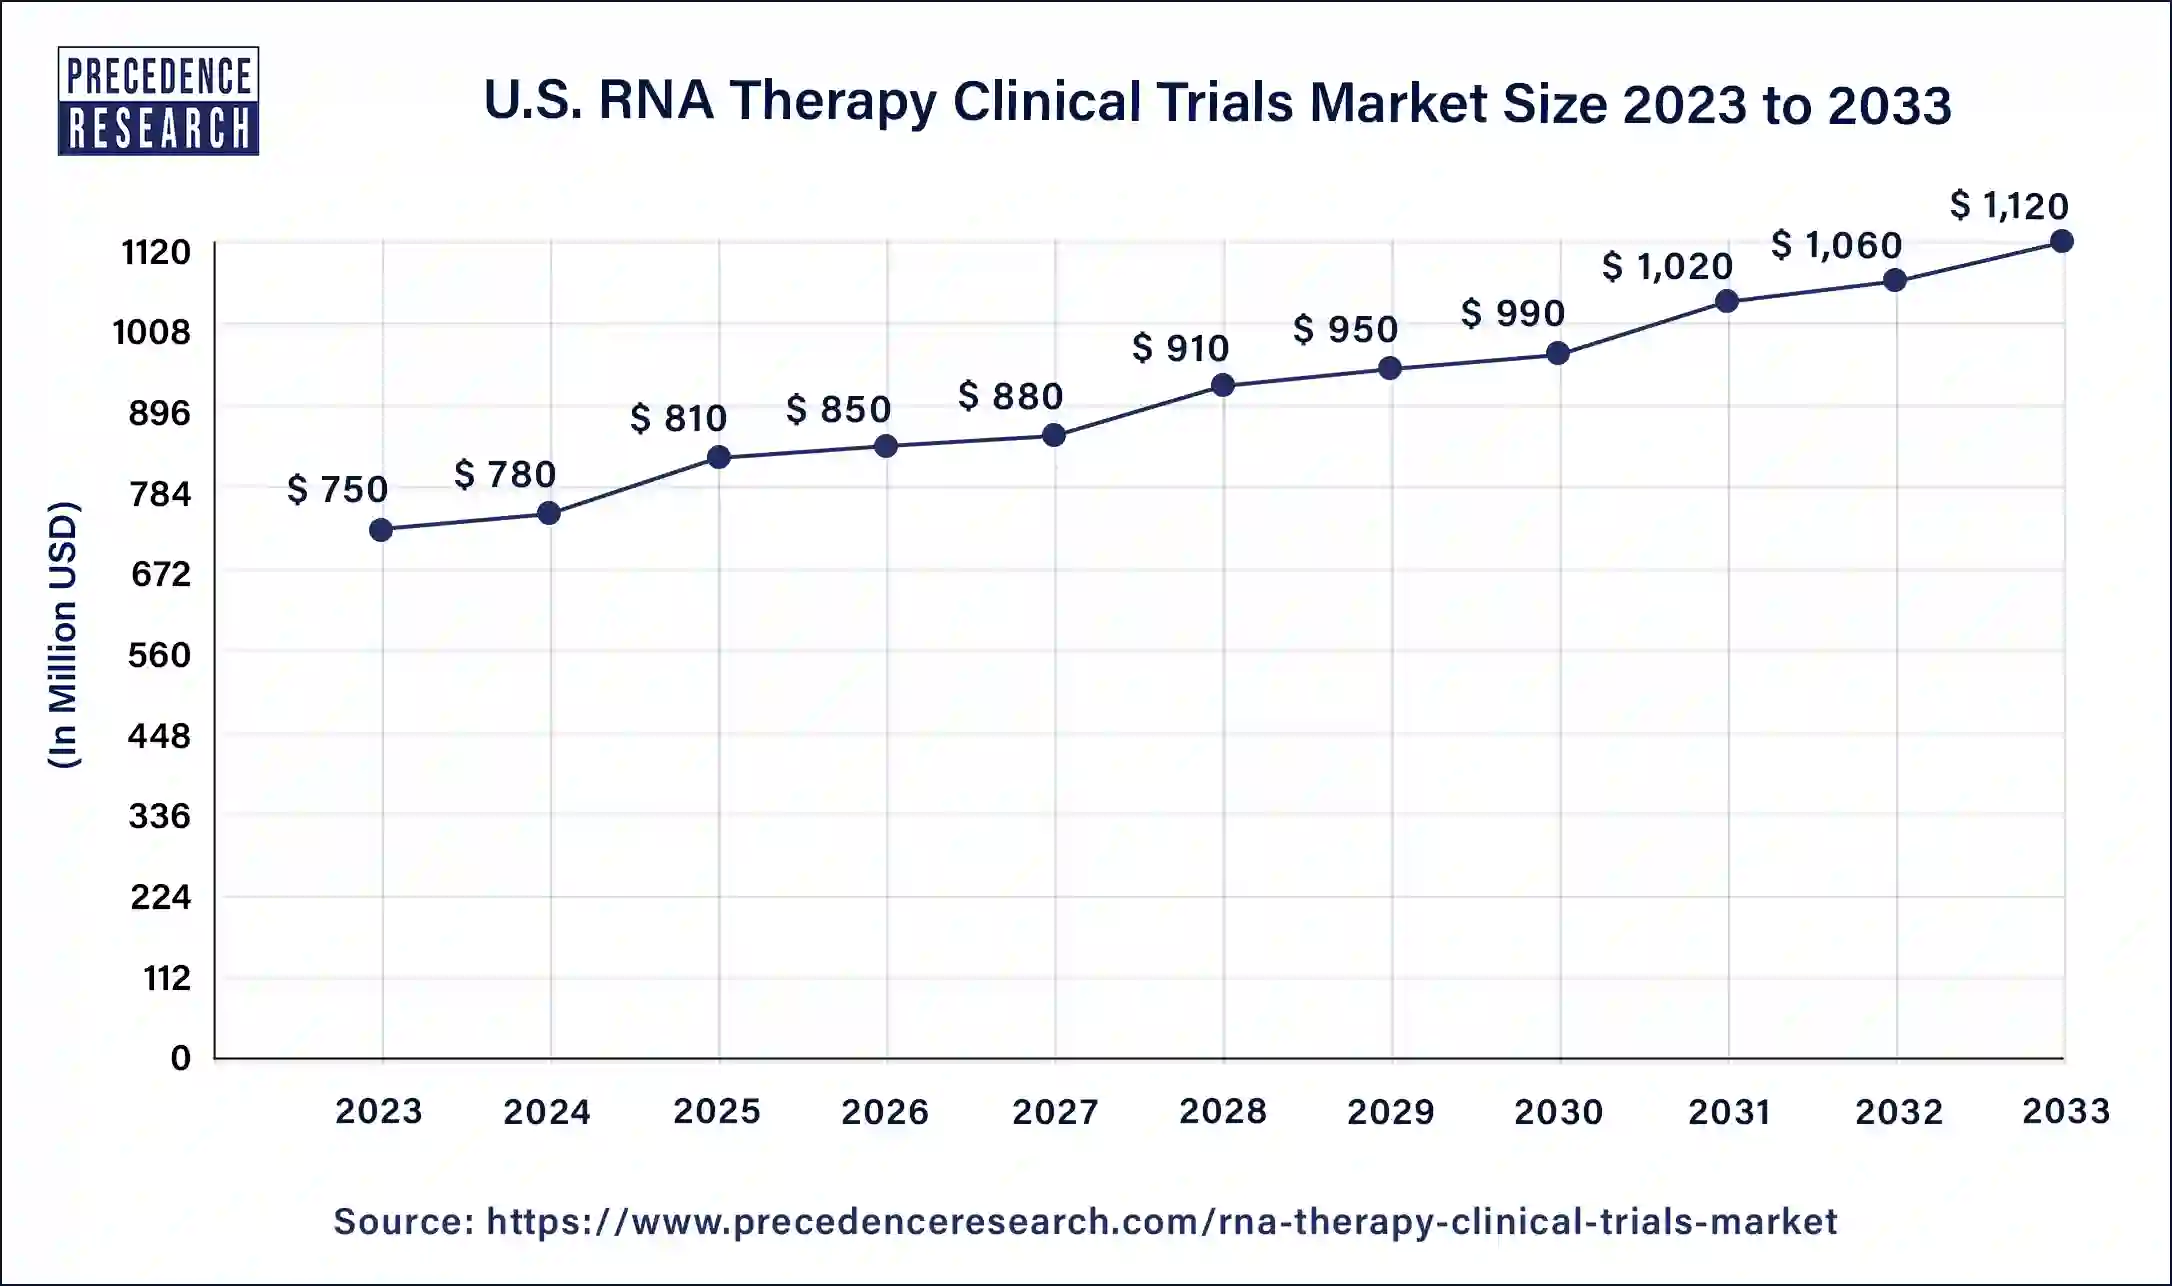 U.S. RNA Therapy Clinical Trials Market Size 2024 to 2033